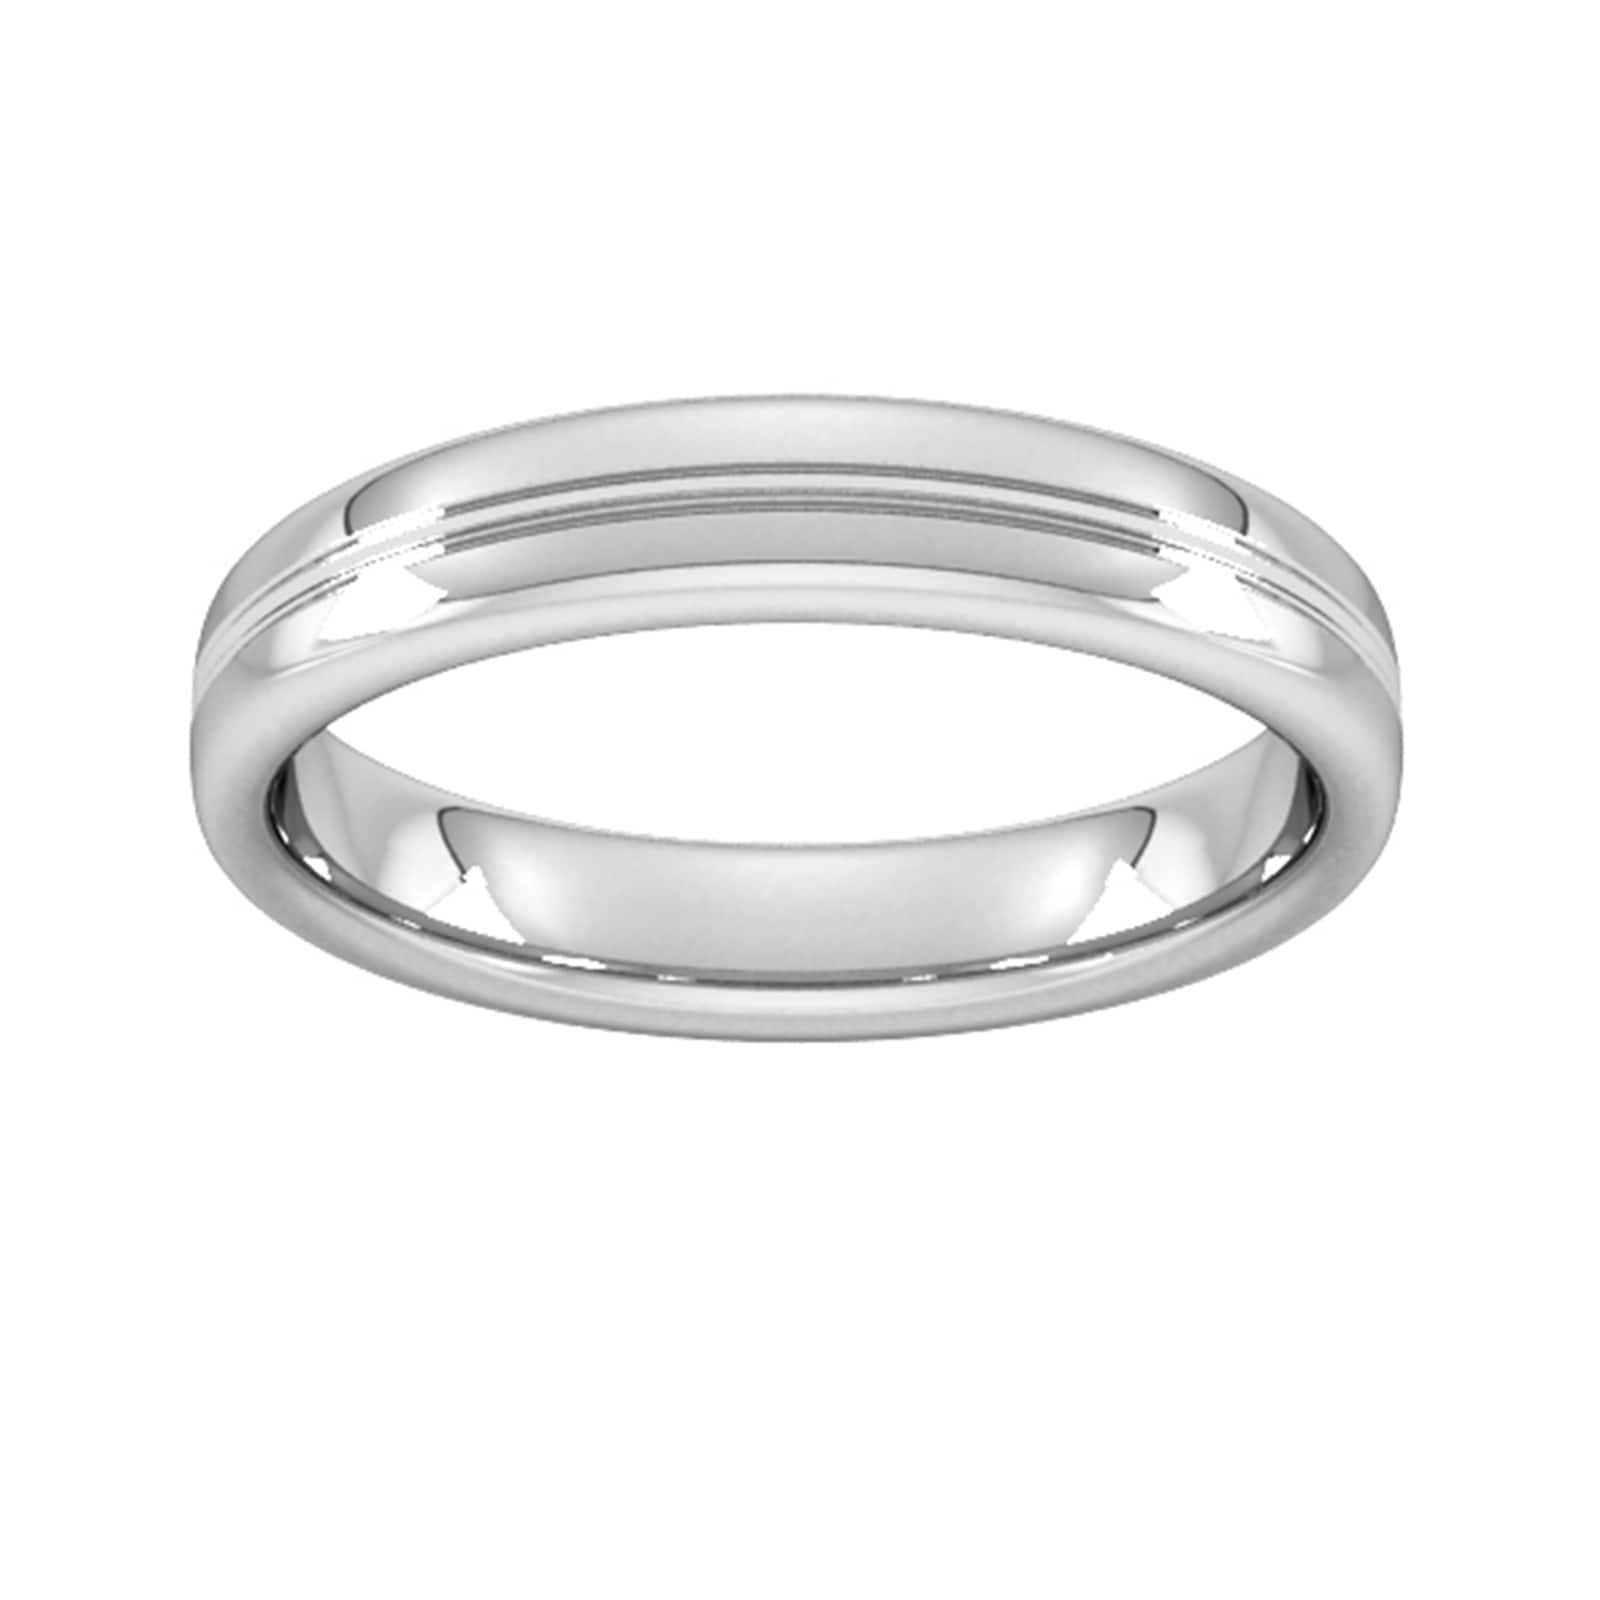 4mm Slight Court Heavy Grooved Polished Finish Wedding Ring In Platinum - Ring Size O